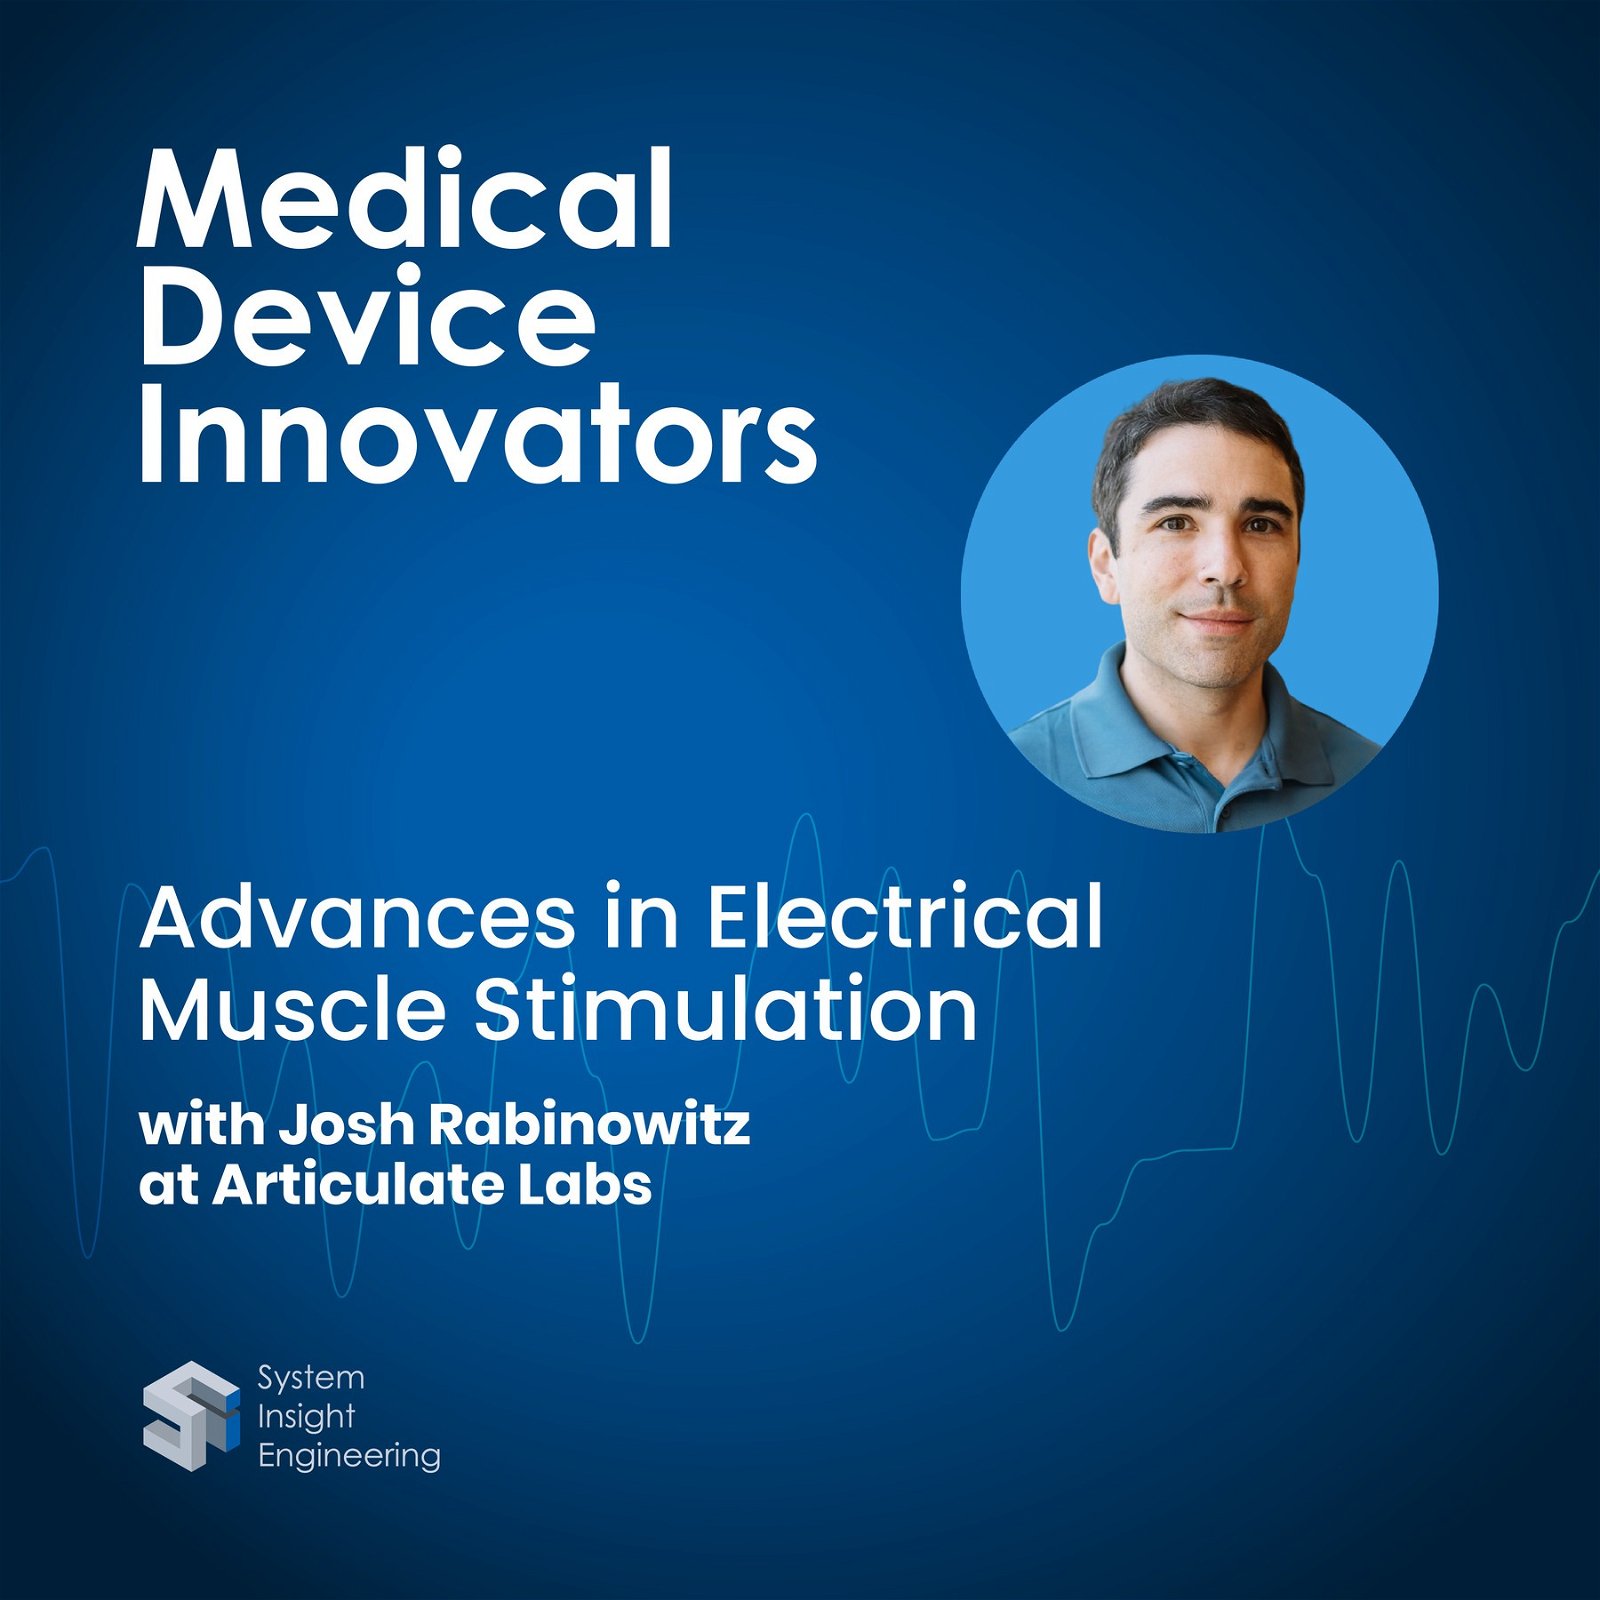 Advances in Electrical Muscle Stimulation with Josh Rabinowitz at Articulate Labs